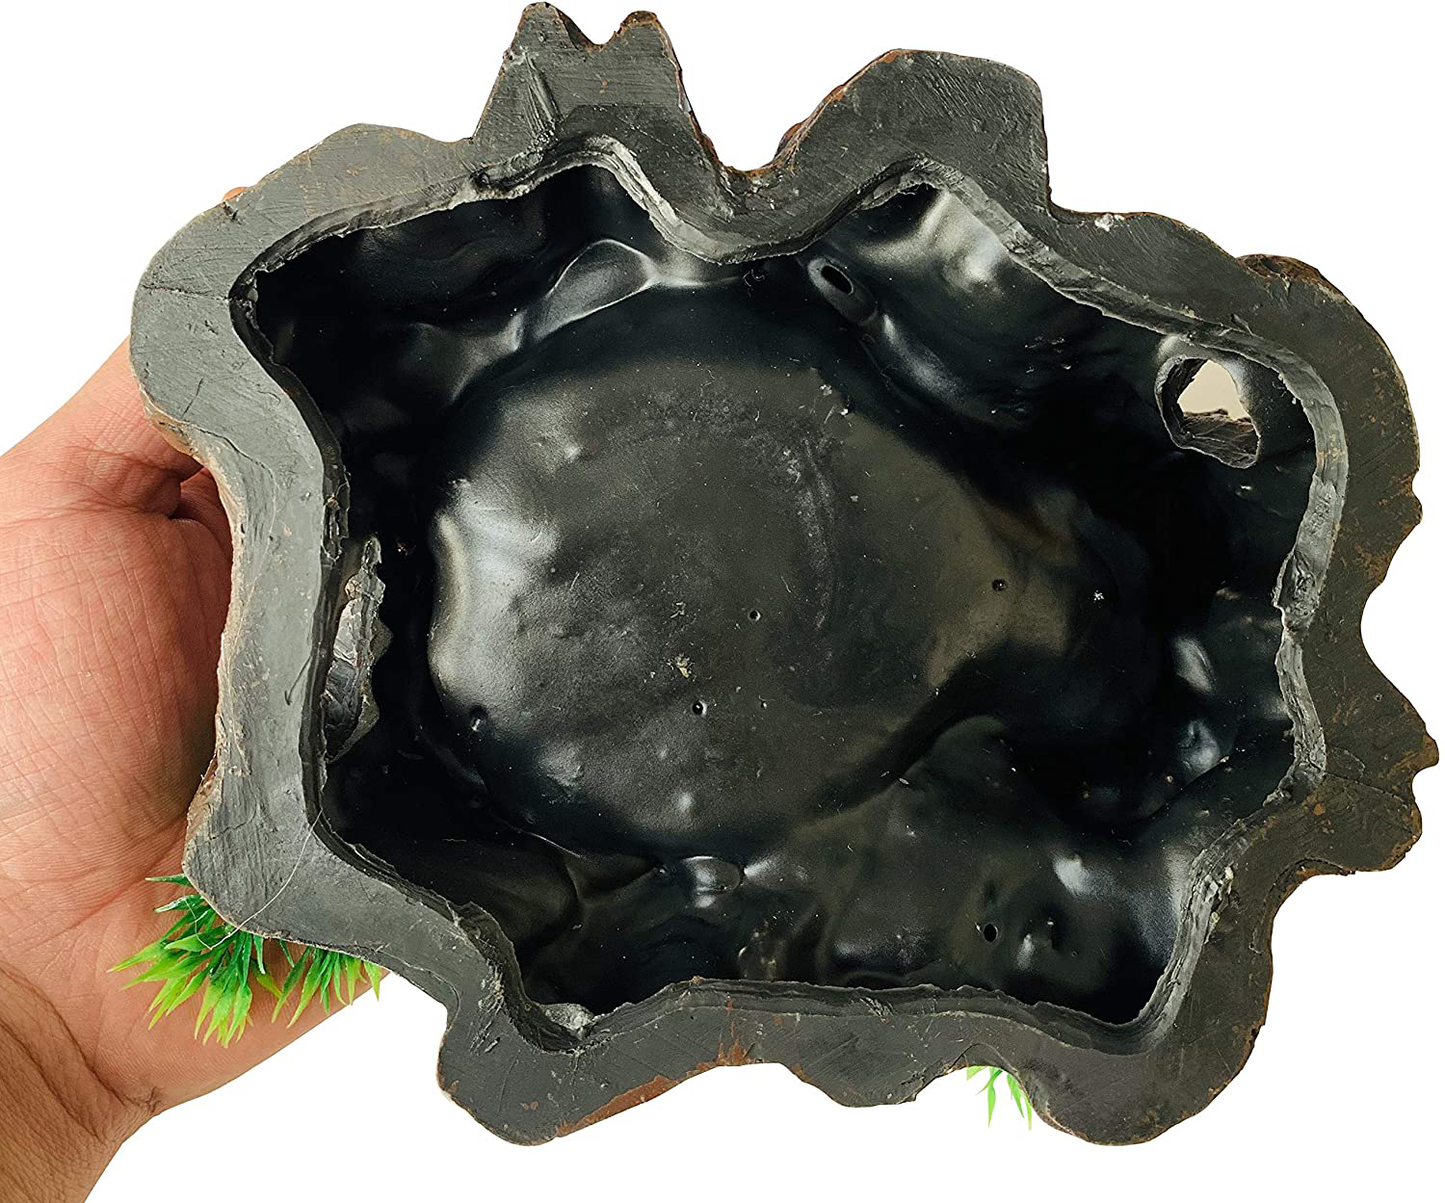 PINVNBY Resin Reptile Platform Artificial Tree Trunk Reptile Tank Decor Food Water Dish Bowl for Bearded Dragon,Lizard, Gecko, Water Frog,Snake